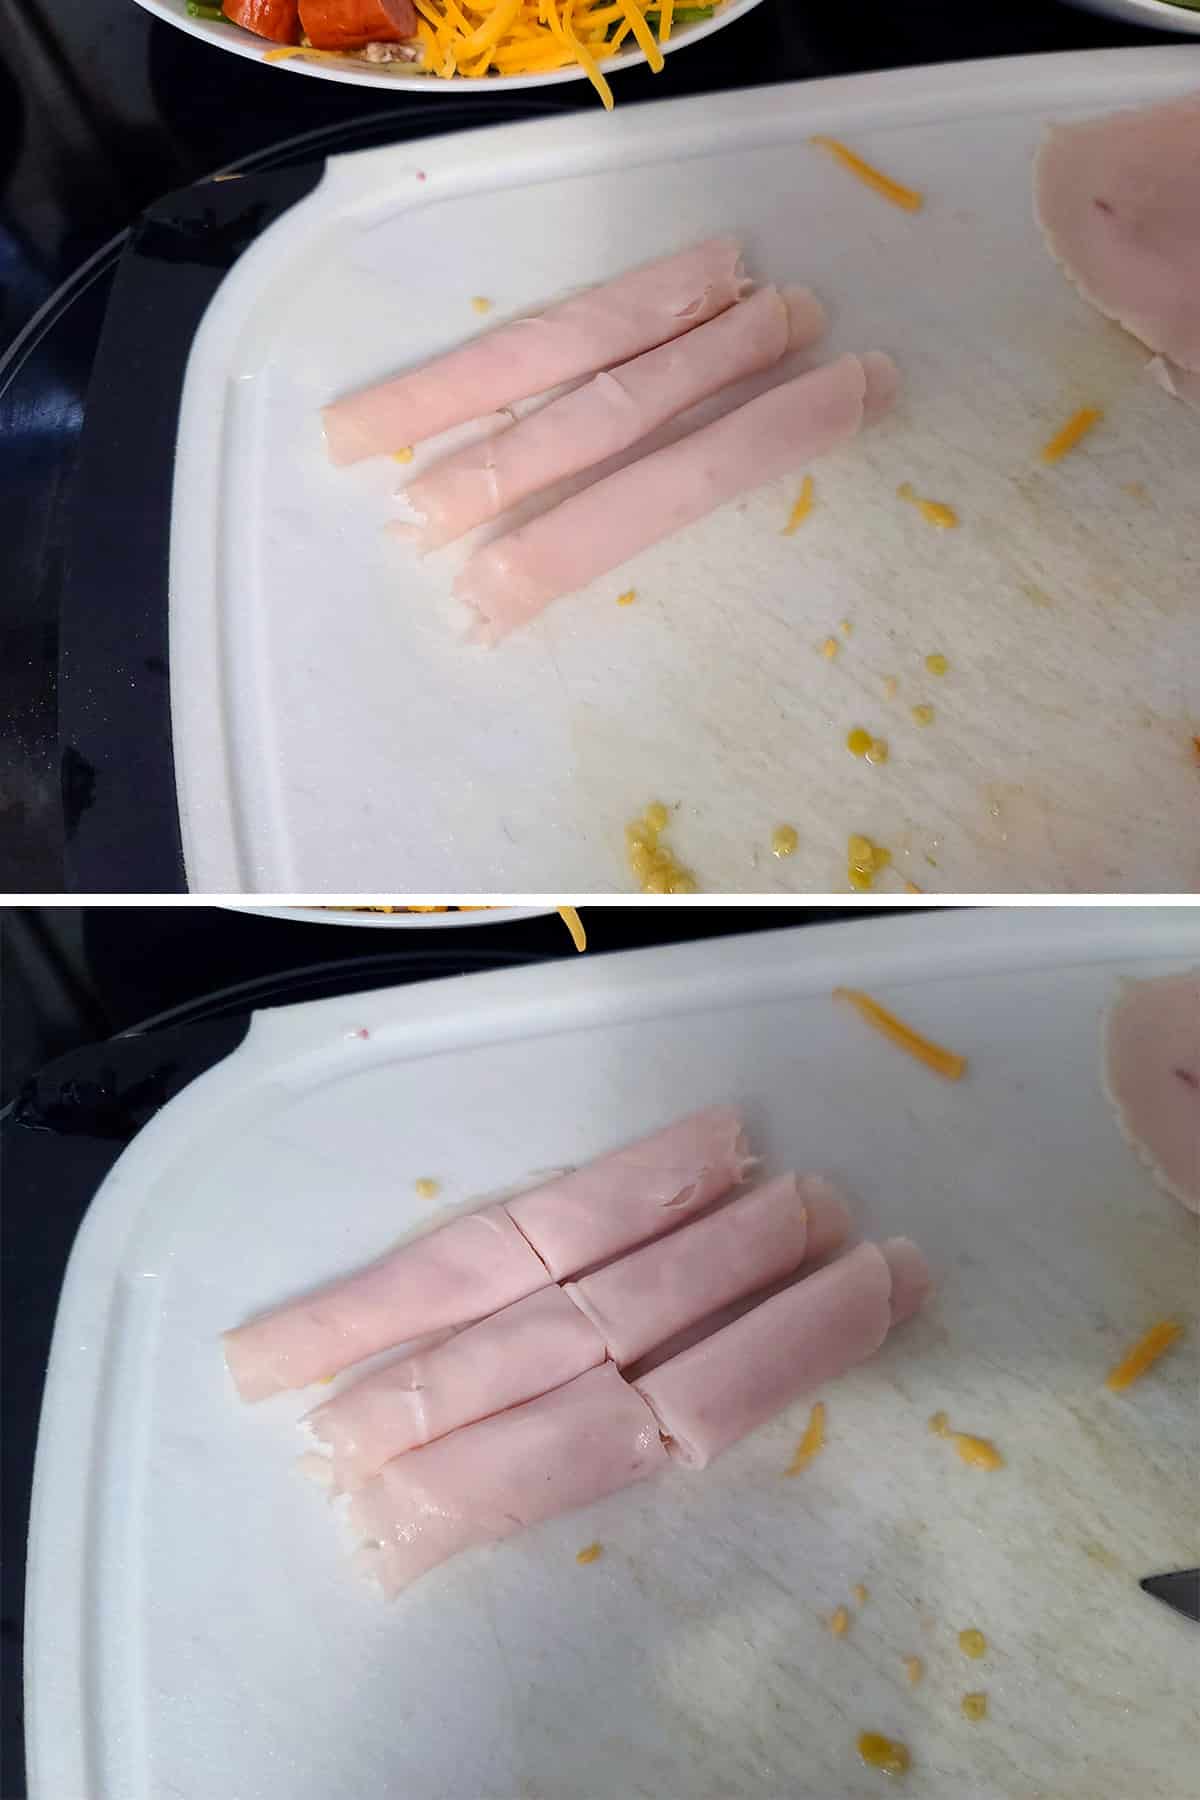 3 rolls of chicken deli meat rolled up and cut in half.